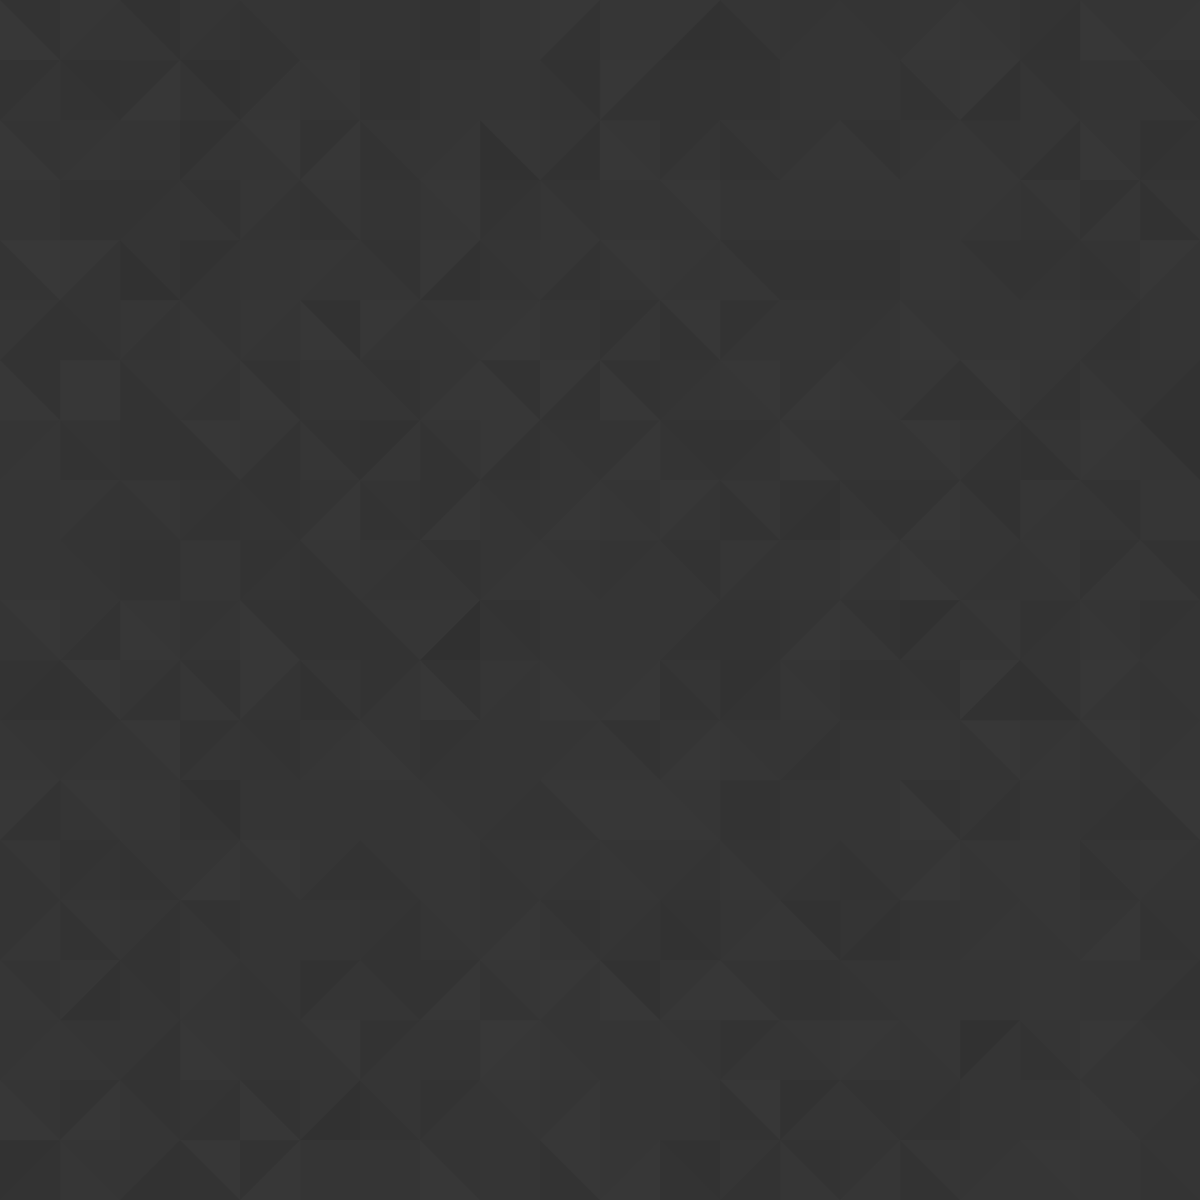 Subtle Patterns. Free textures for your next web project